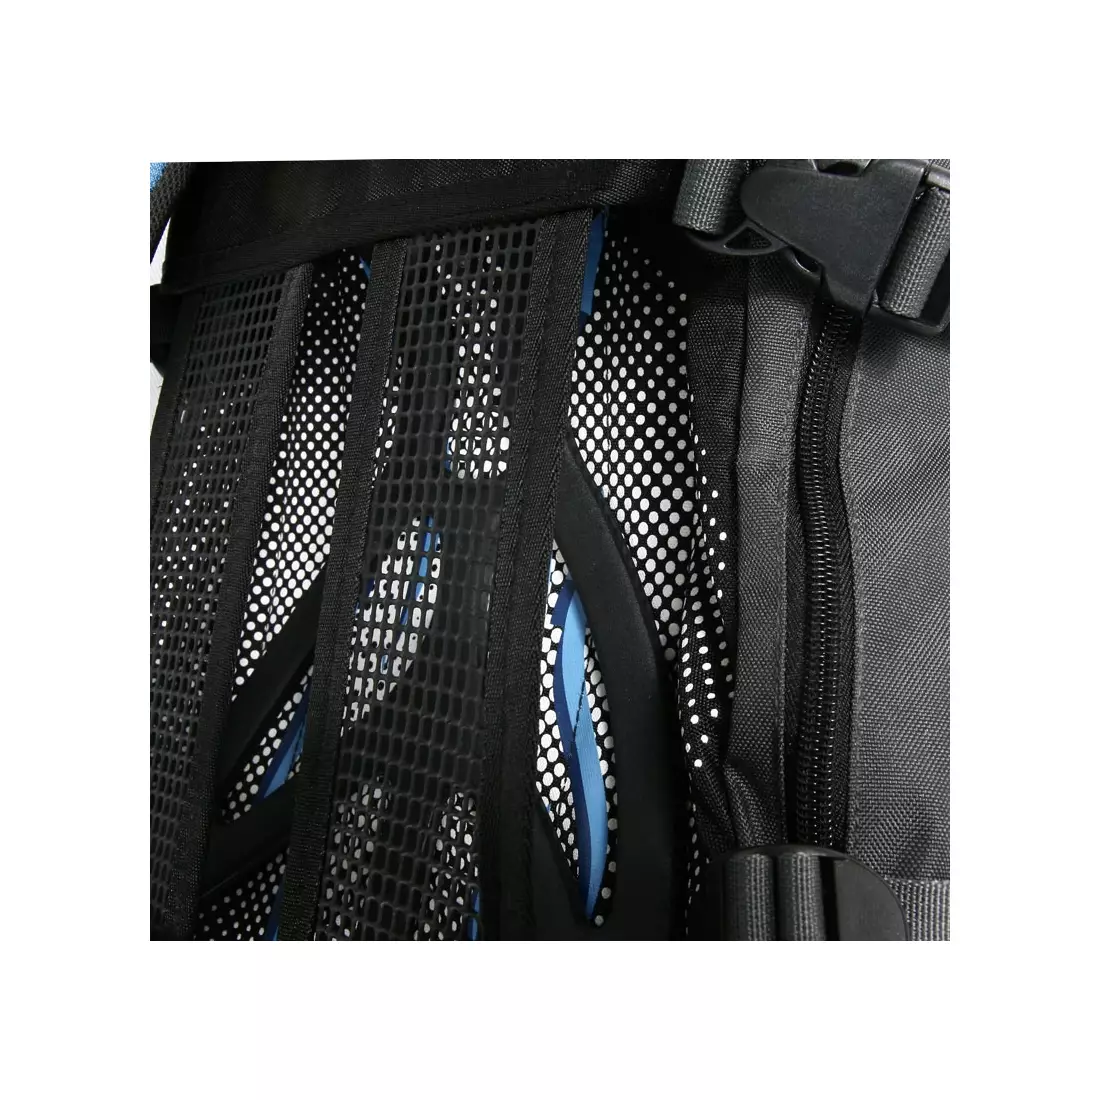 AXON SPEED - sports backpack 28L - color: Blue